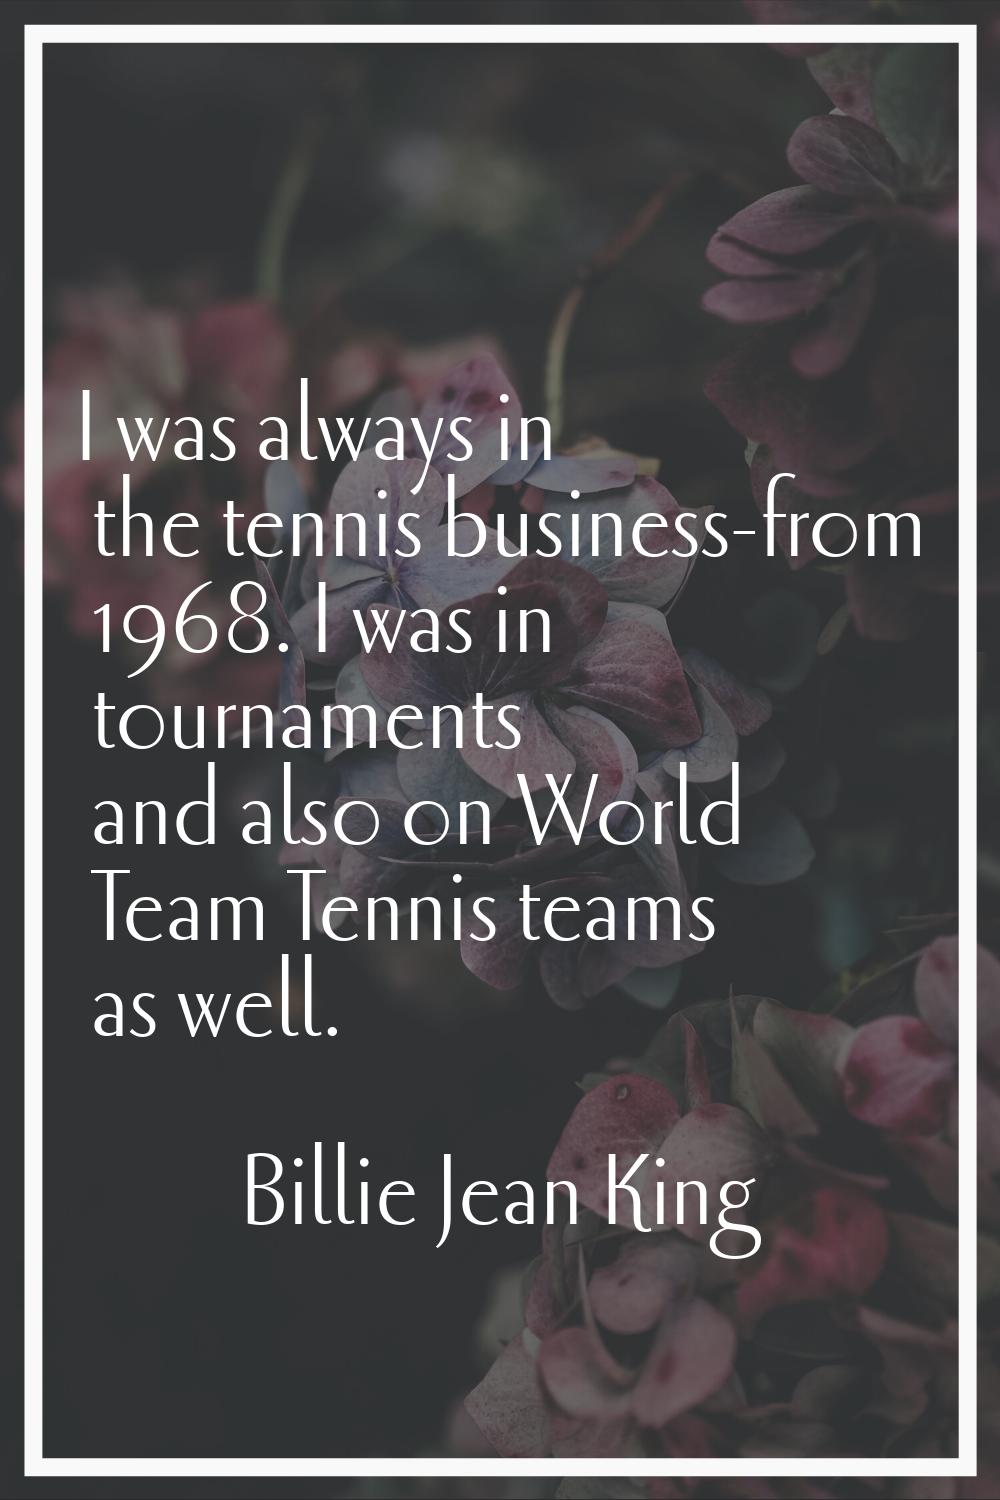 I was always in the tennis business-from 1968. I was in tournaments and also on World Team Tennis t